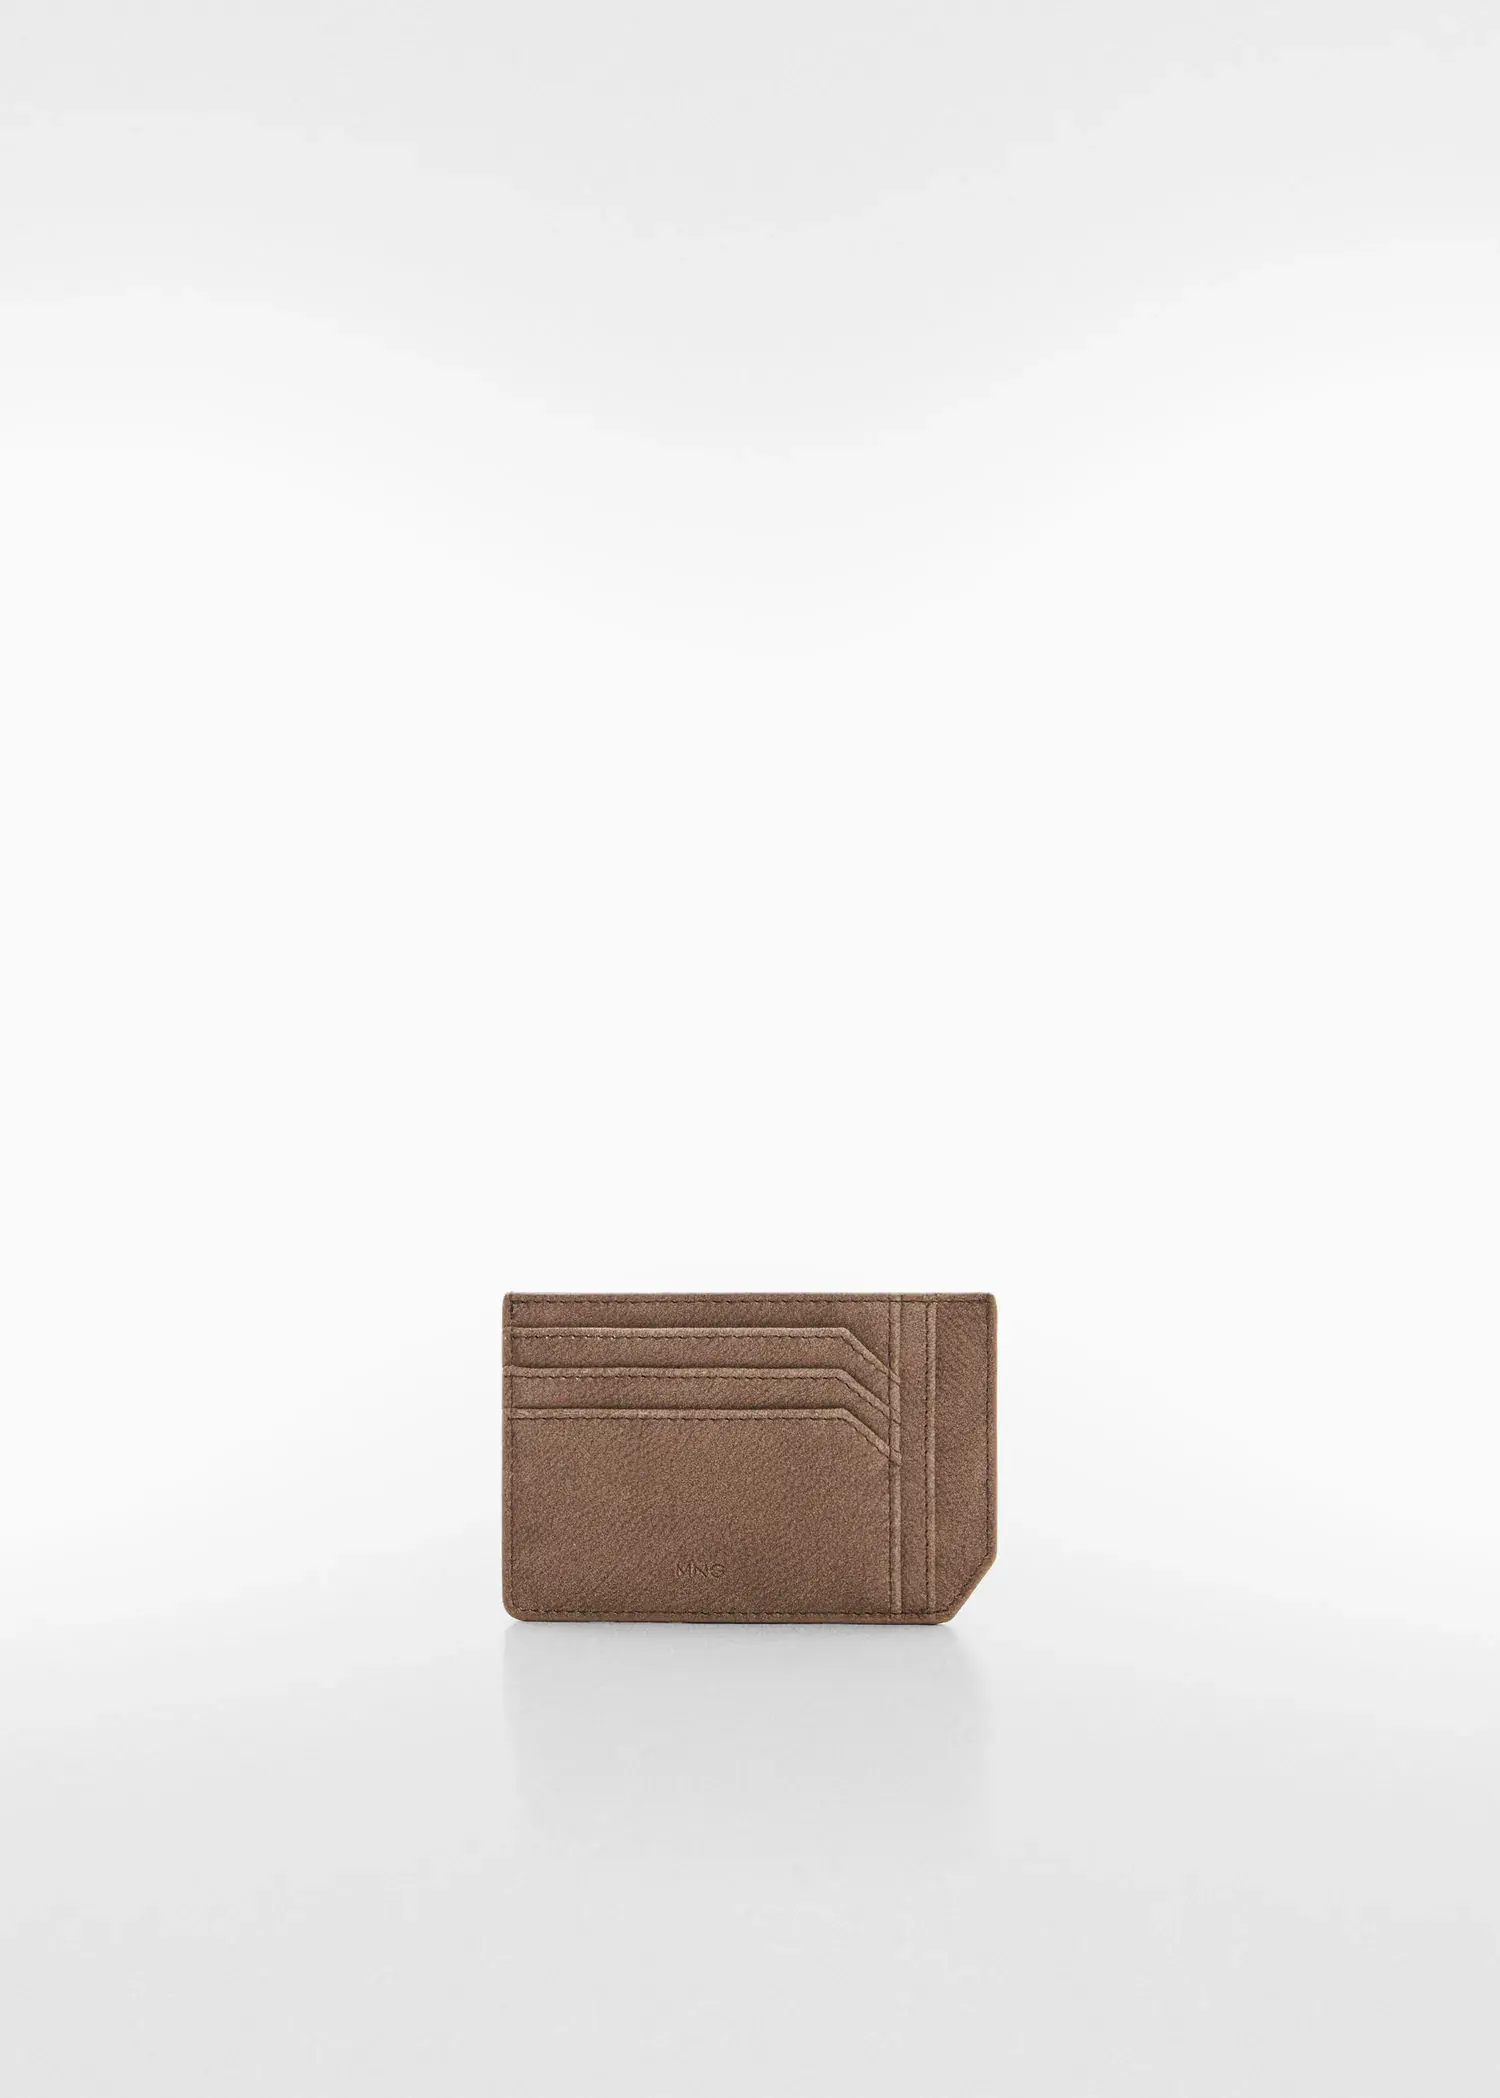 Mango Anti-contactless leather-effect card holder. a brown card holder sitting on top of a white table. 